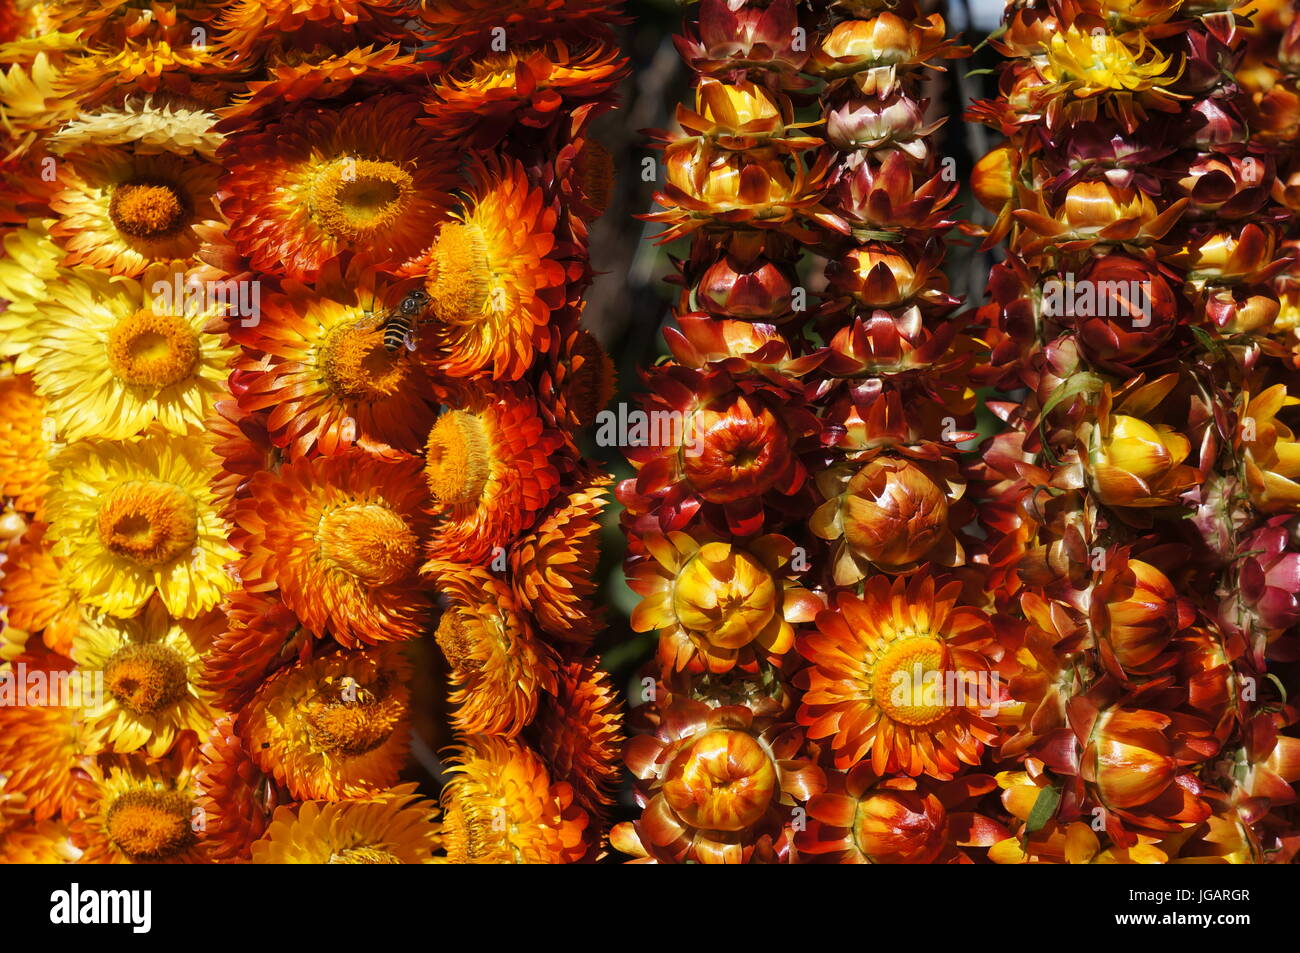 Close up vibrant background. Yellow / orange hanging Everlasting Helichrysum sunflower flowers with bee / wasp Market stall Baguio city Philippines. Stock Photo